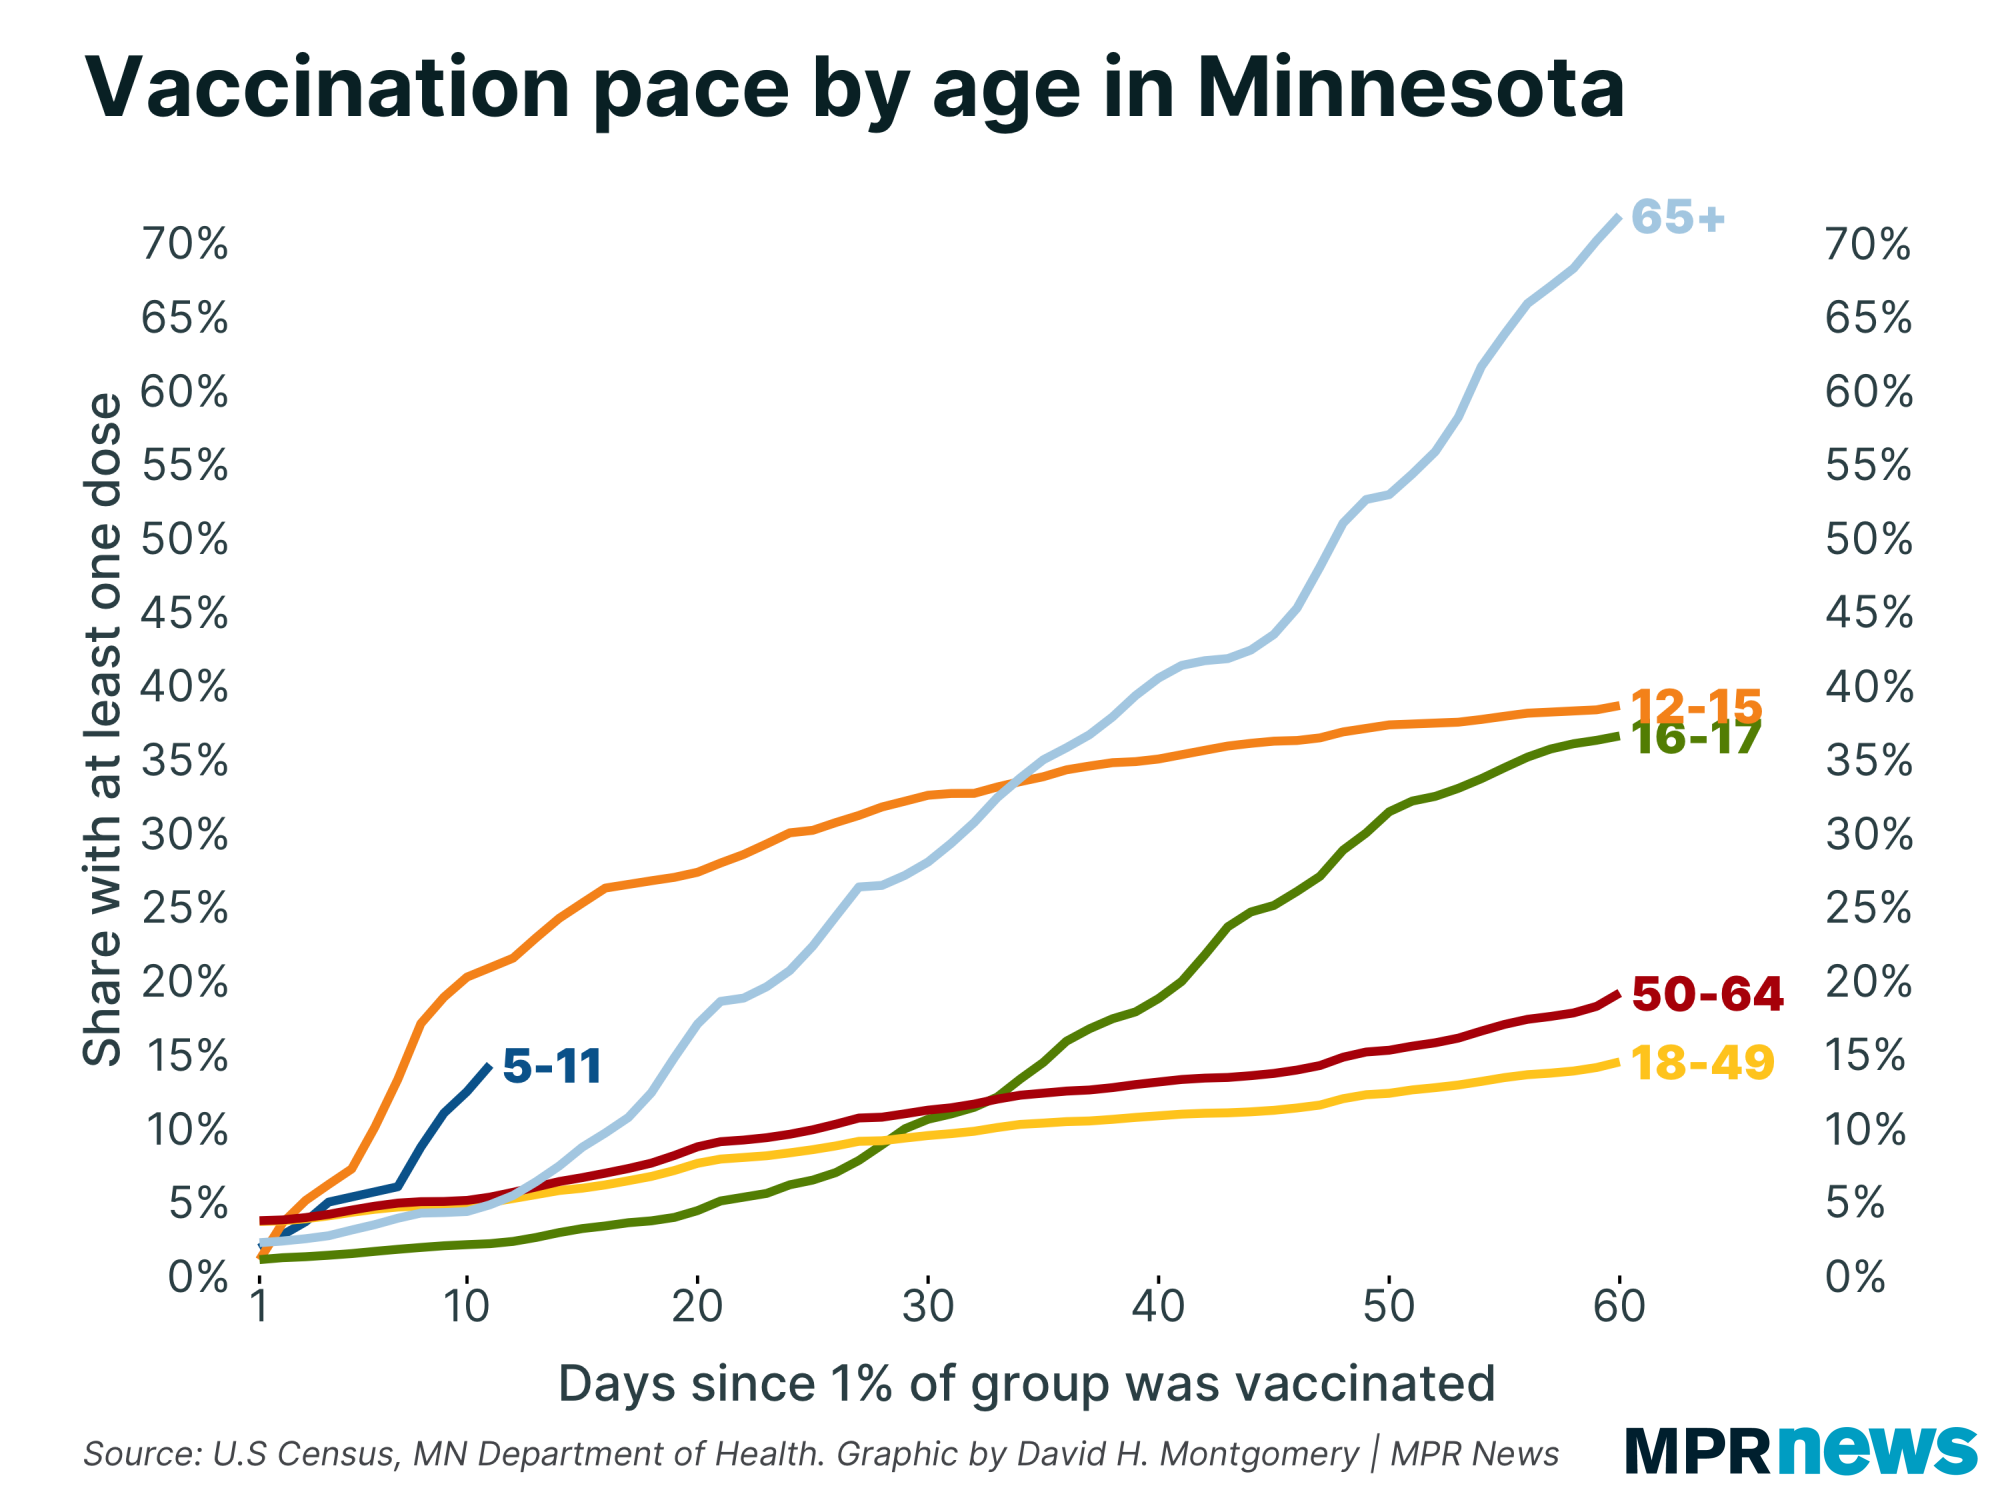 Graph of COVID-19 vaccination pace by age in Minnesota